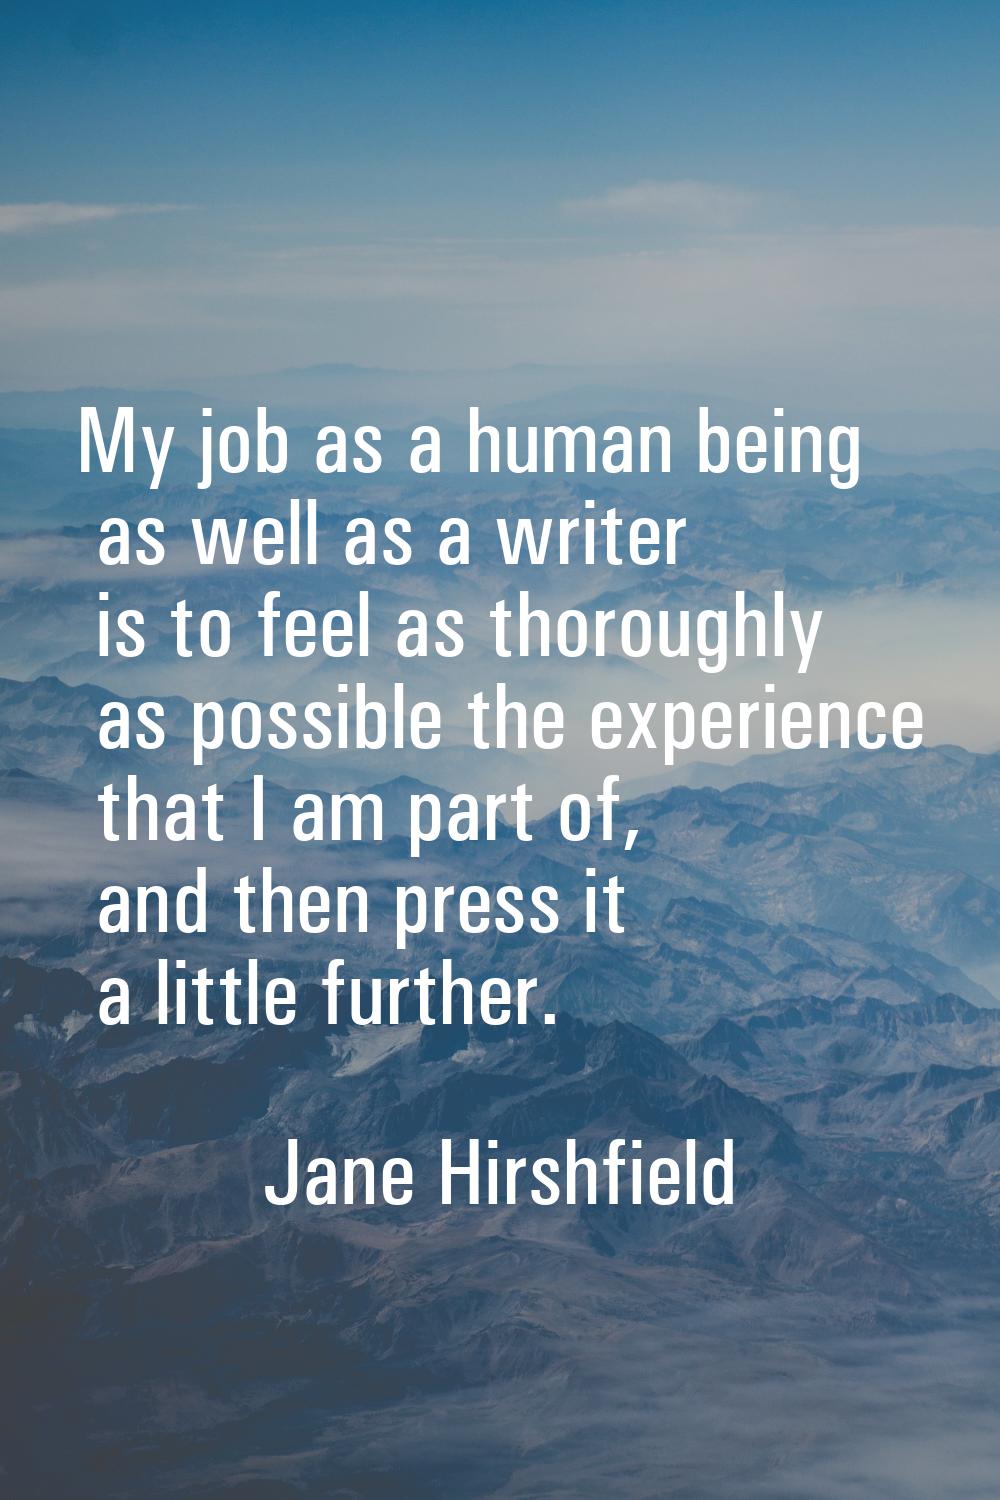 My job as a human being as well as a writer is to feel as thoroughly as possible the experience tha